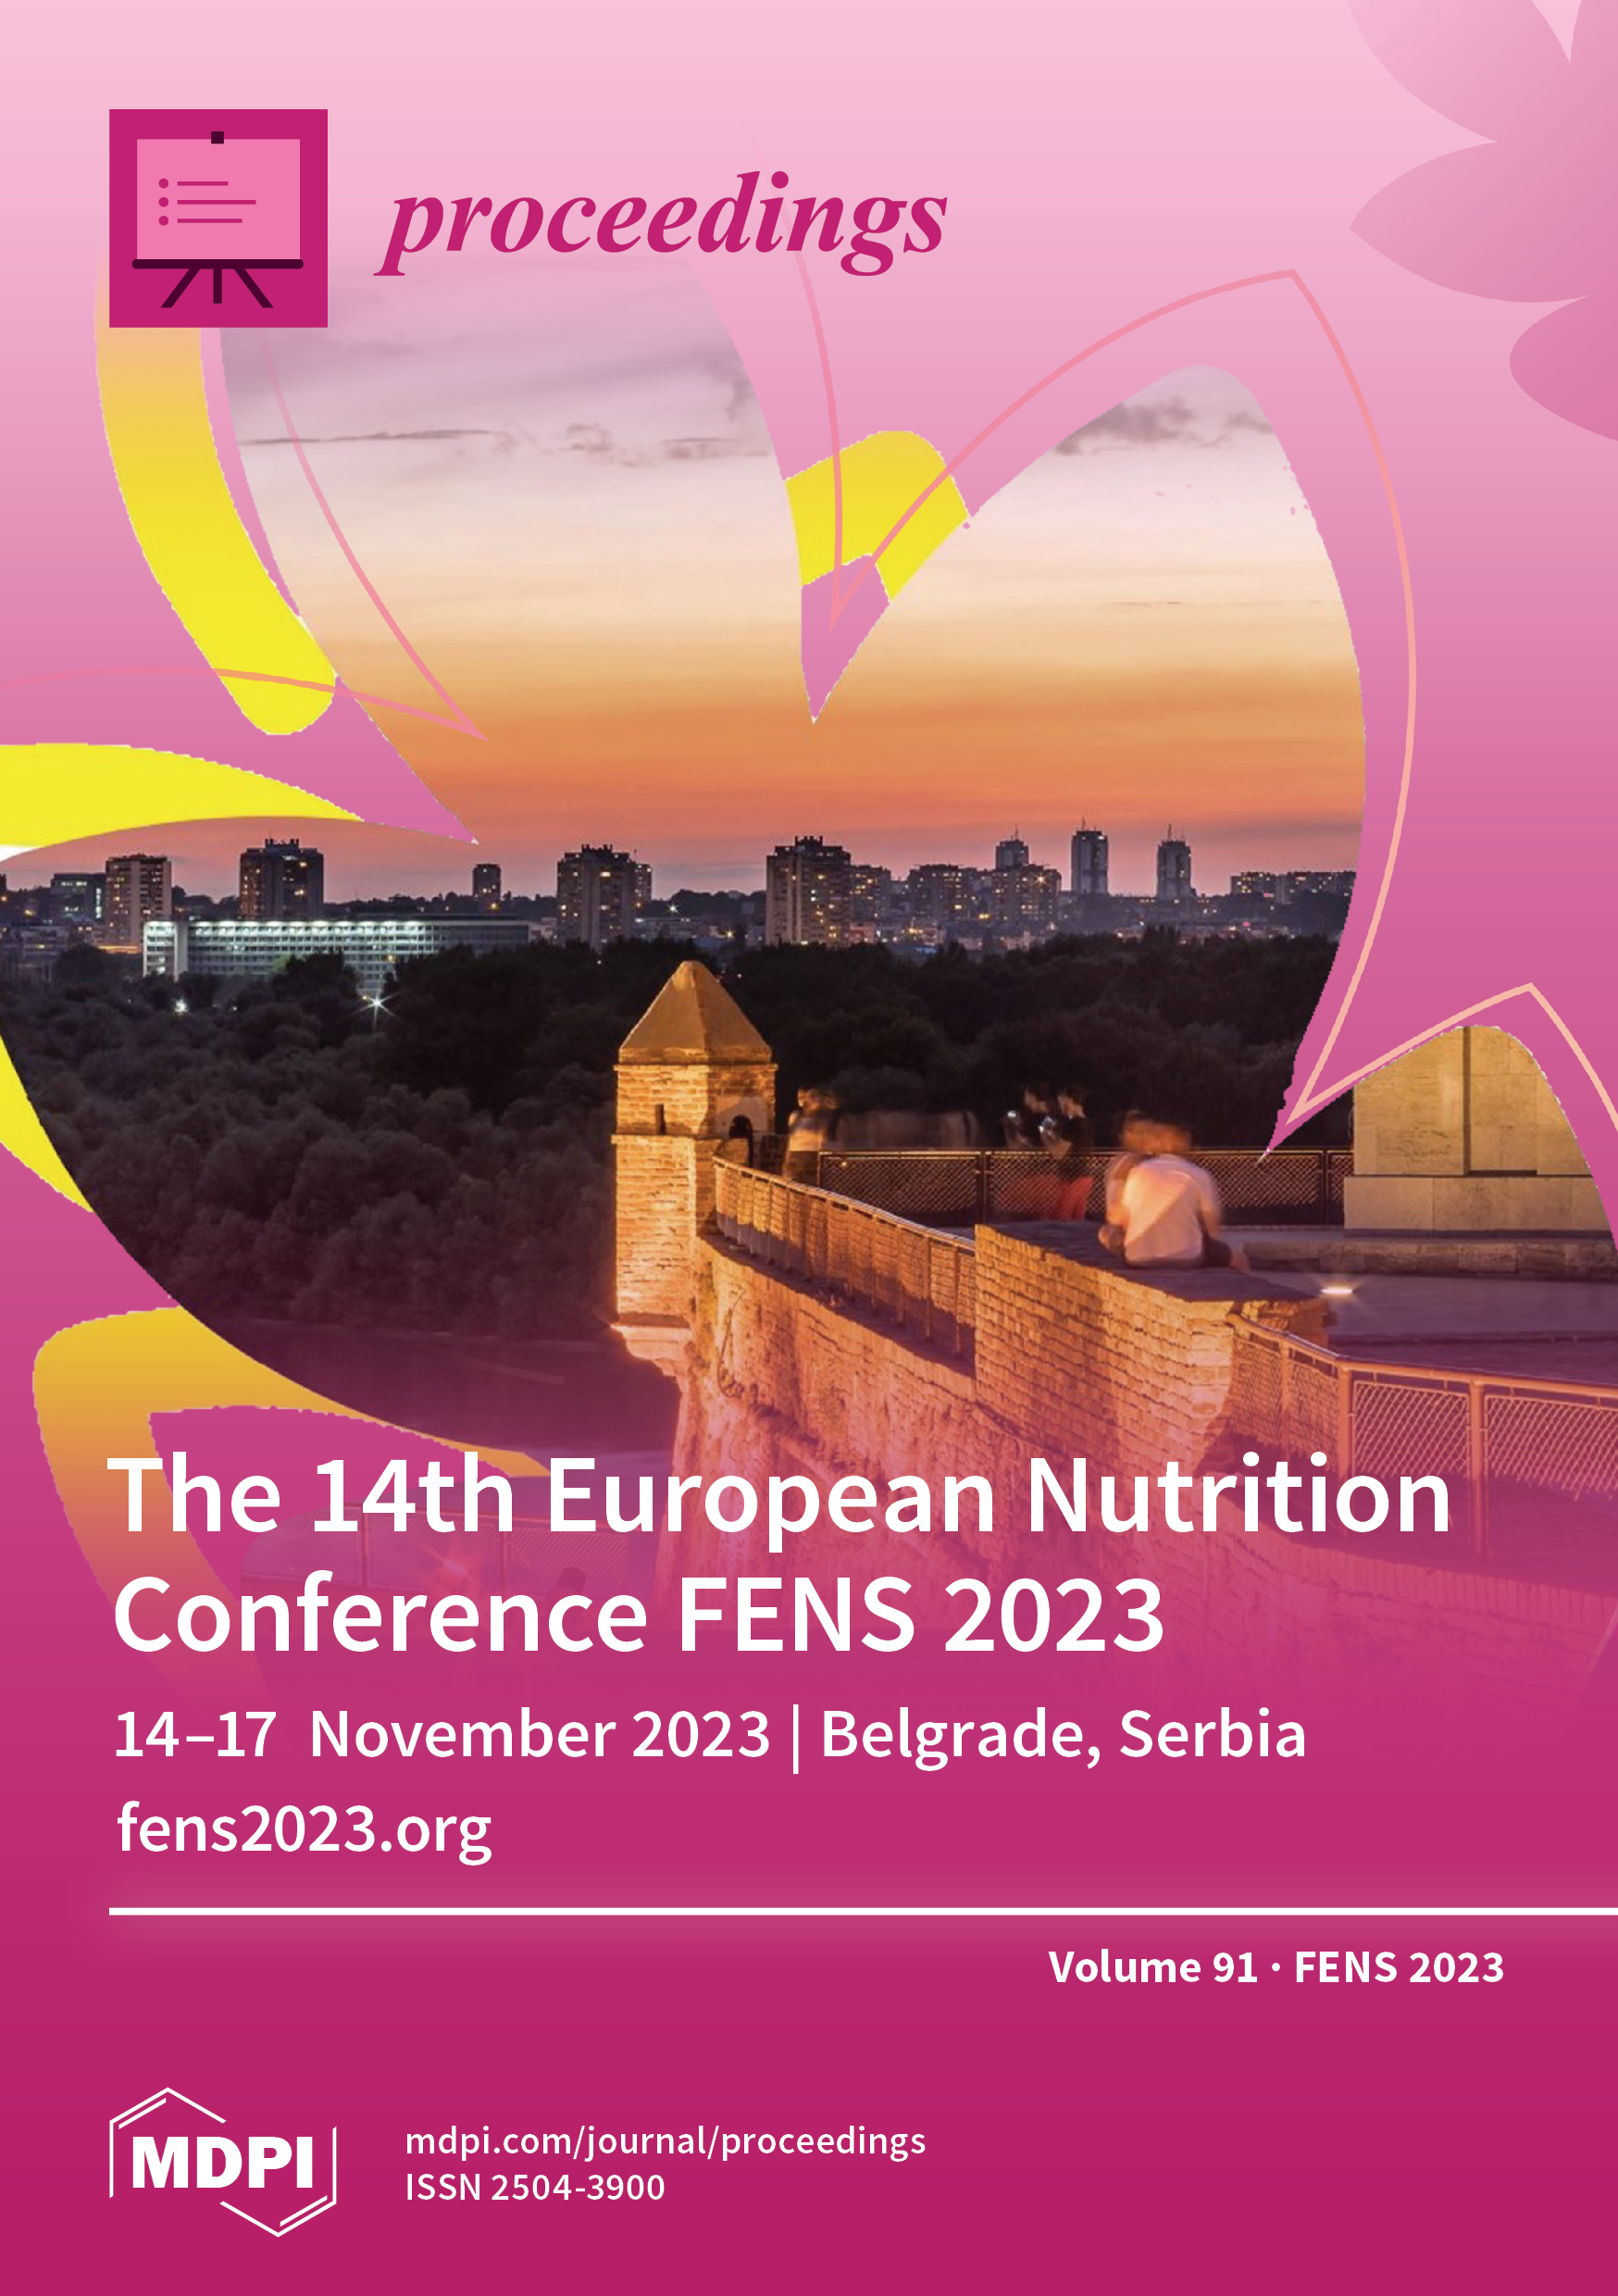 Proceedings | FENS 2023 - Browse Articles